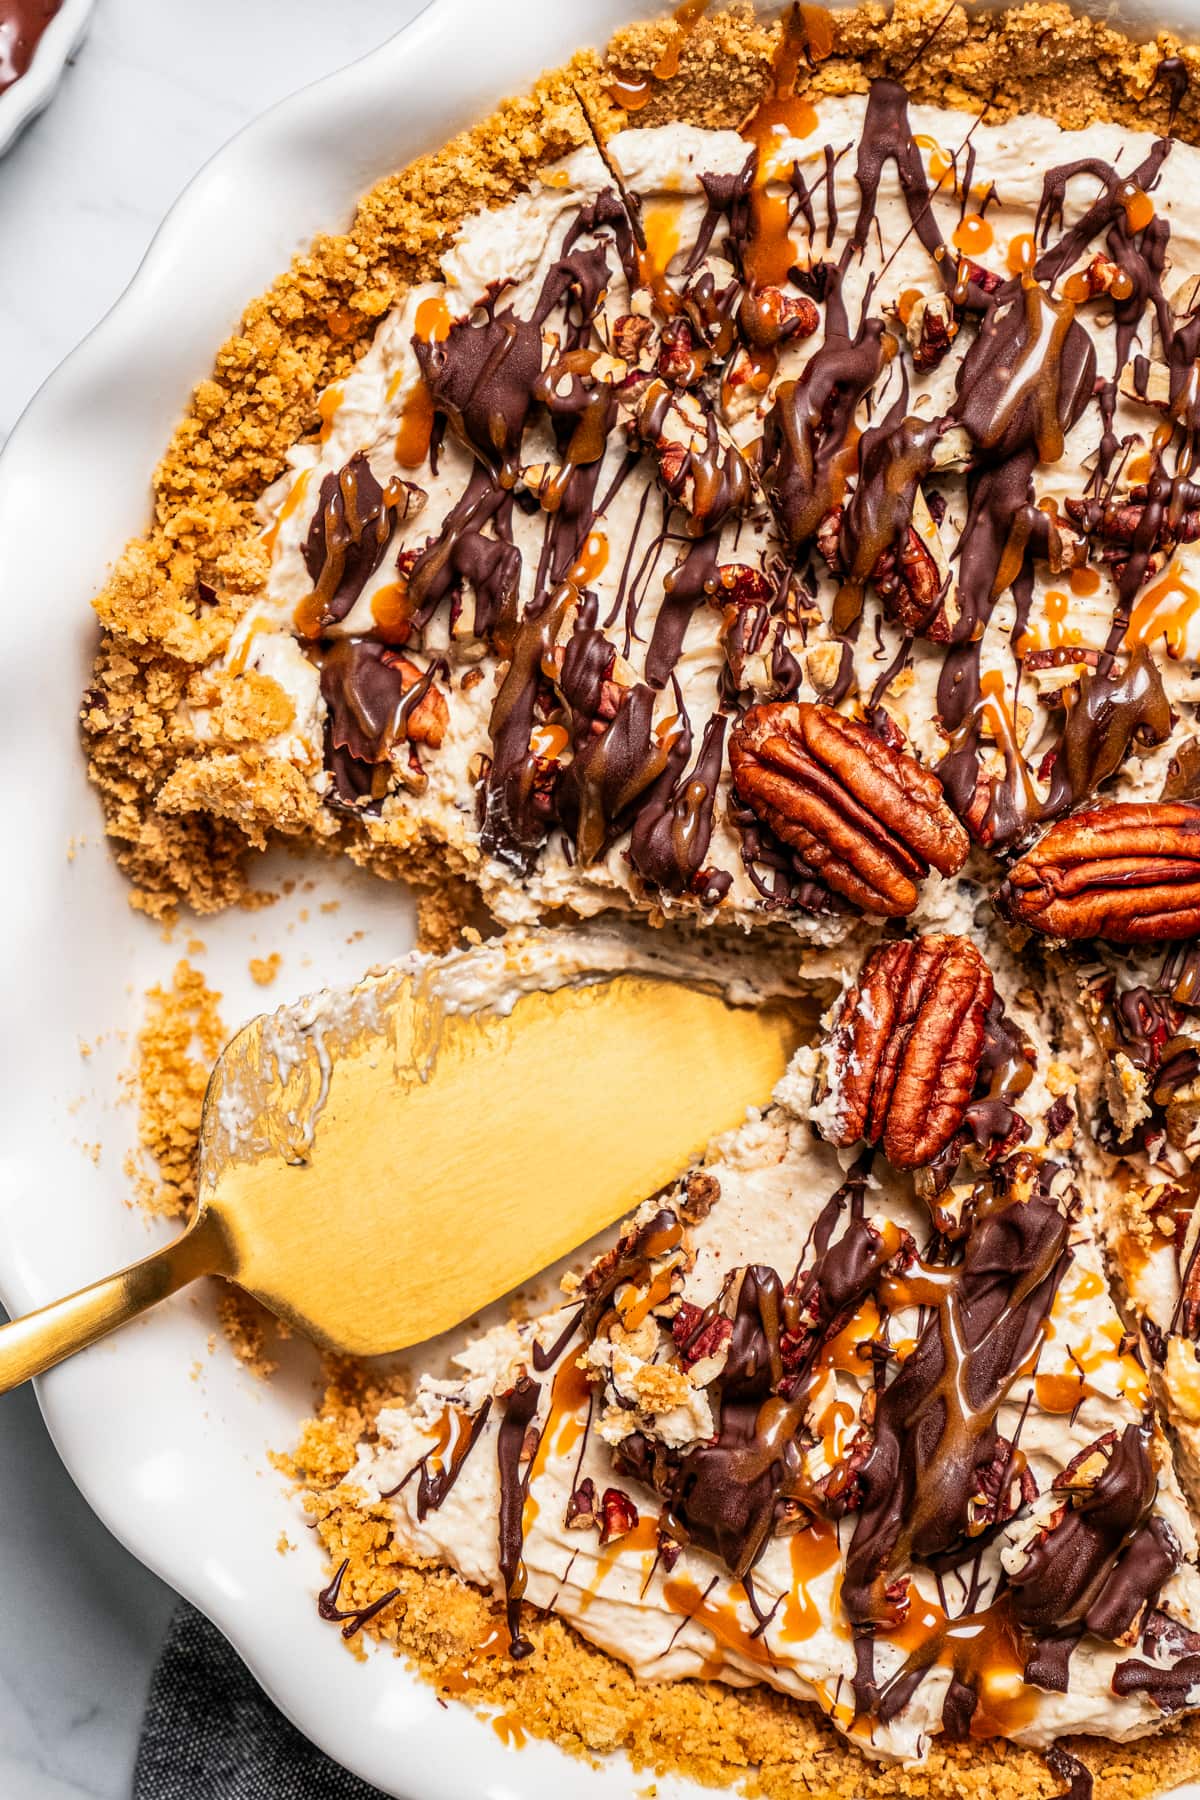 Overhead view of Turtle pie topped with toasted pecans and drizzled with caramel and chocolate, with a slice missing.